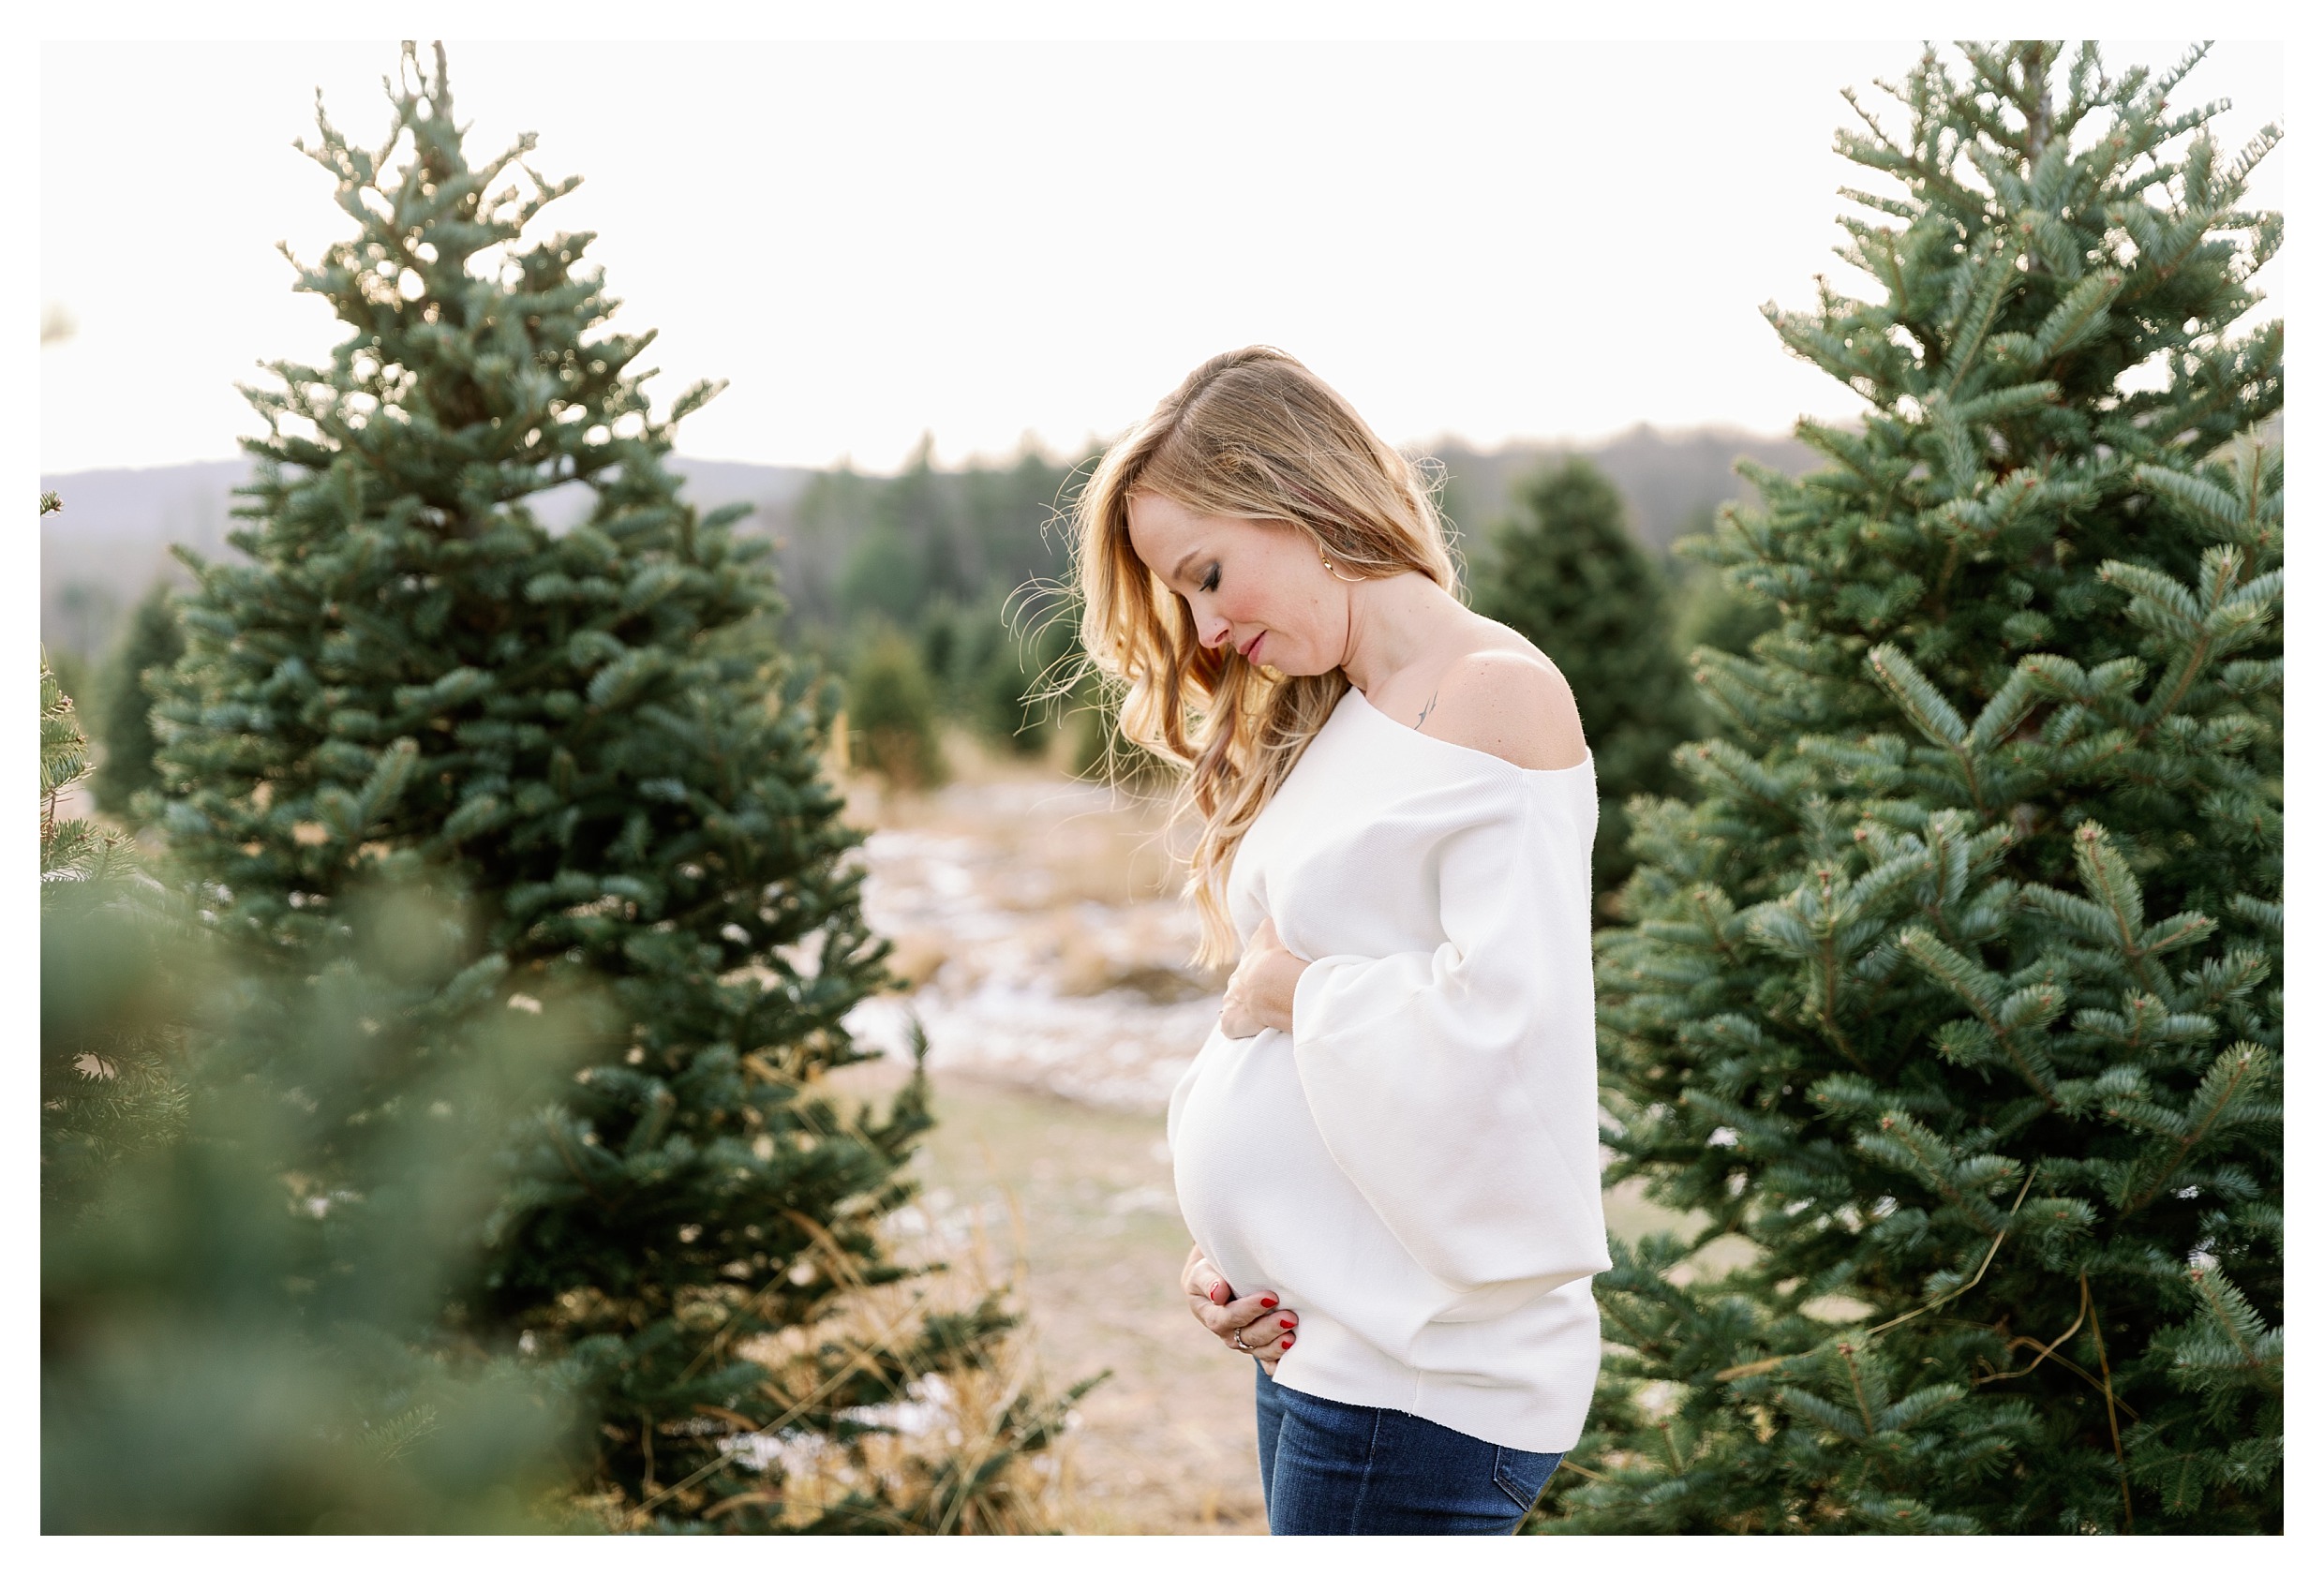 Maternity shoot at tree farm in Wausau for Christmas mini session